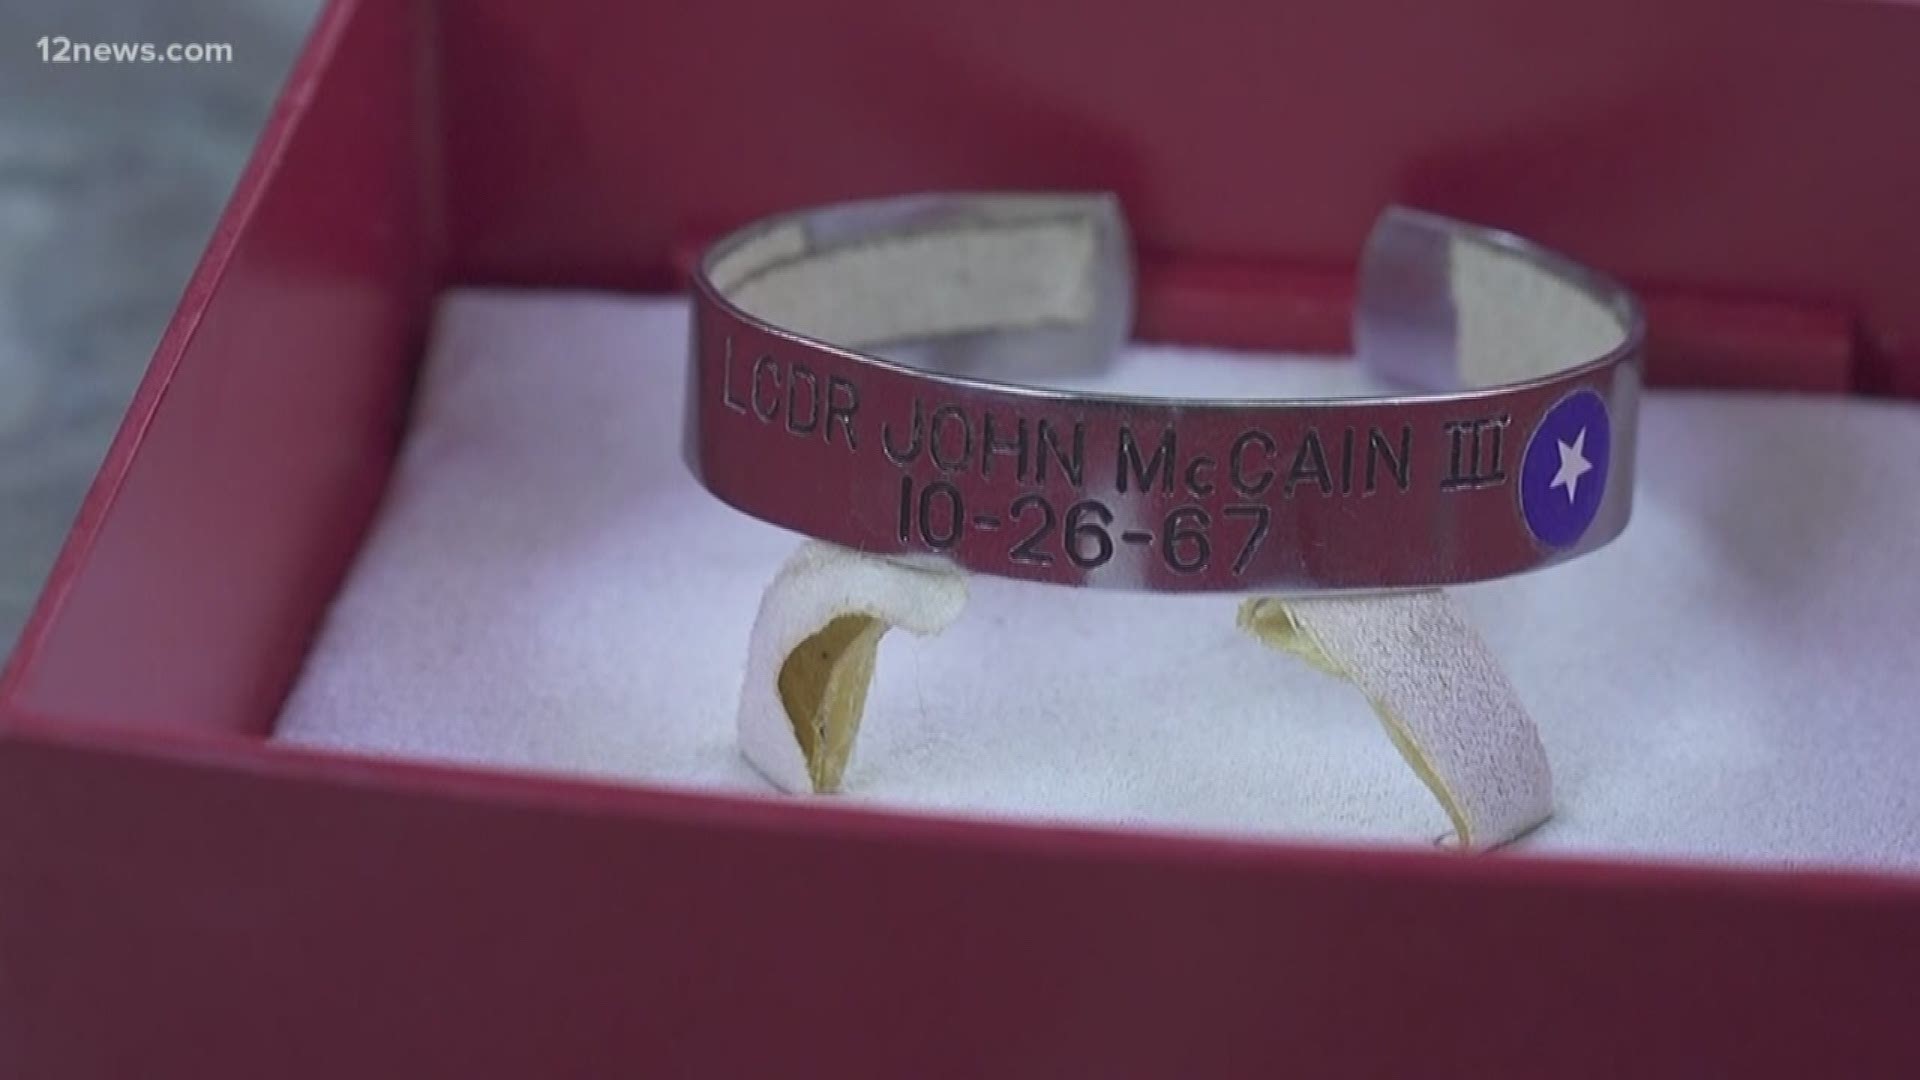 Millions of P.O.W. bracelets were sold during the Vietnam War to draw attention to those captured during the war. We talk to two women who wore the bracelets with John McCain's name on them and what it means to them.